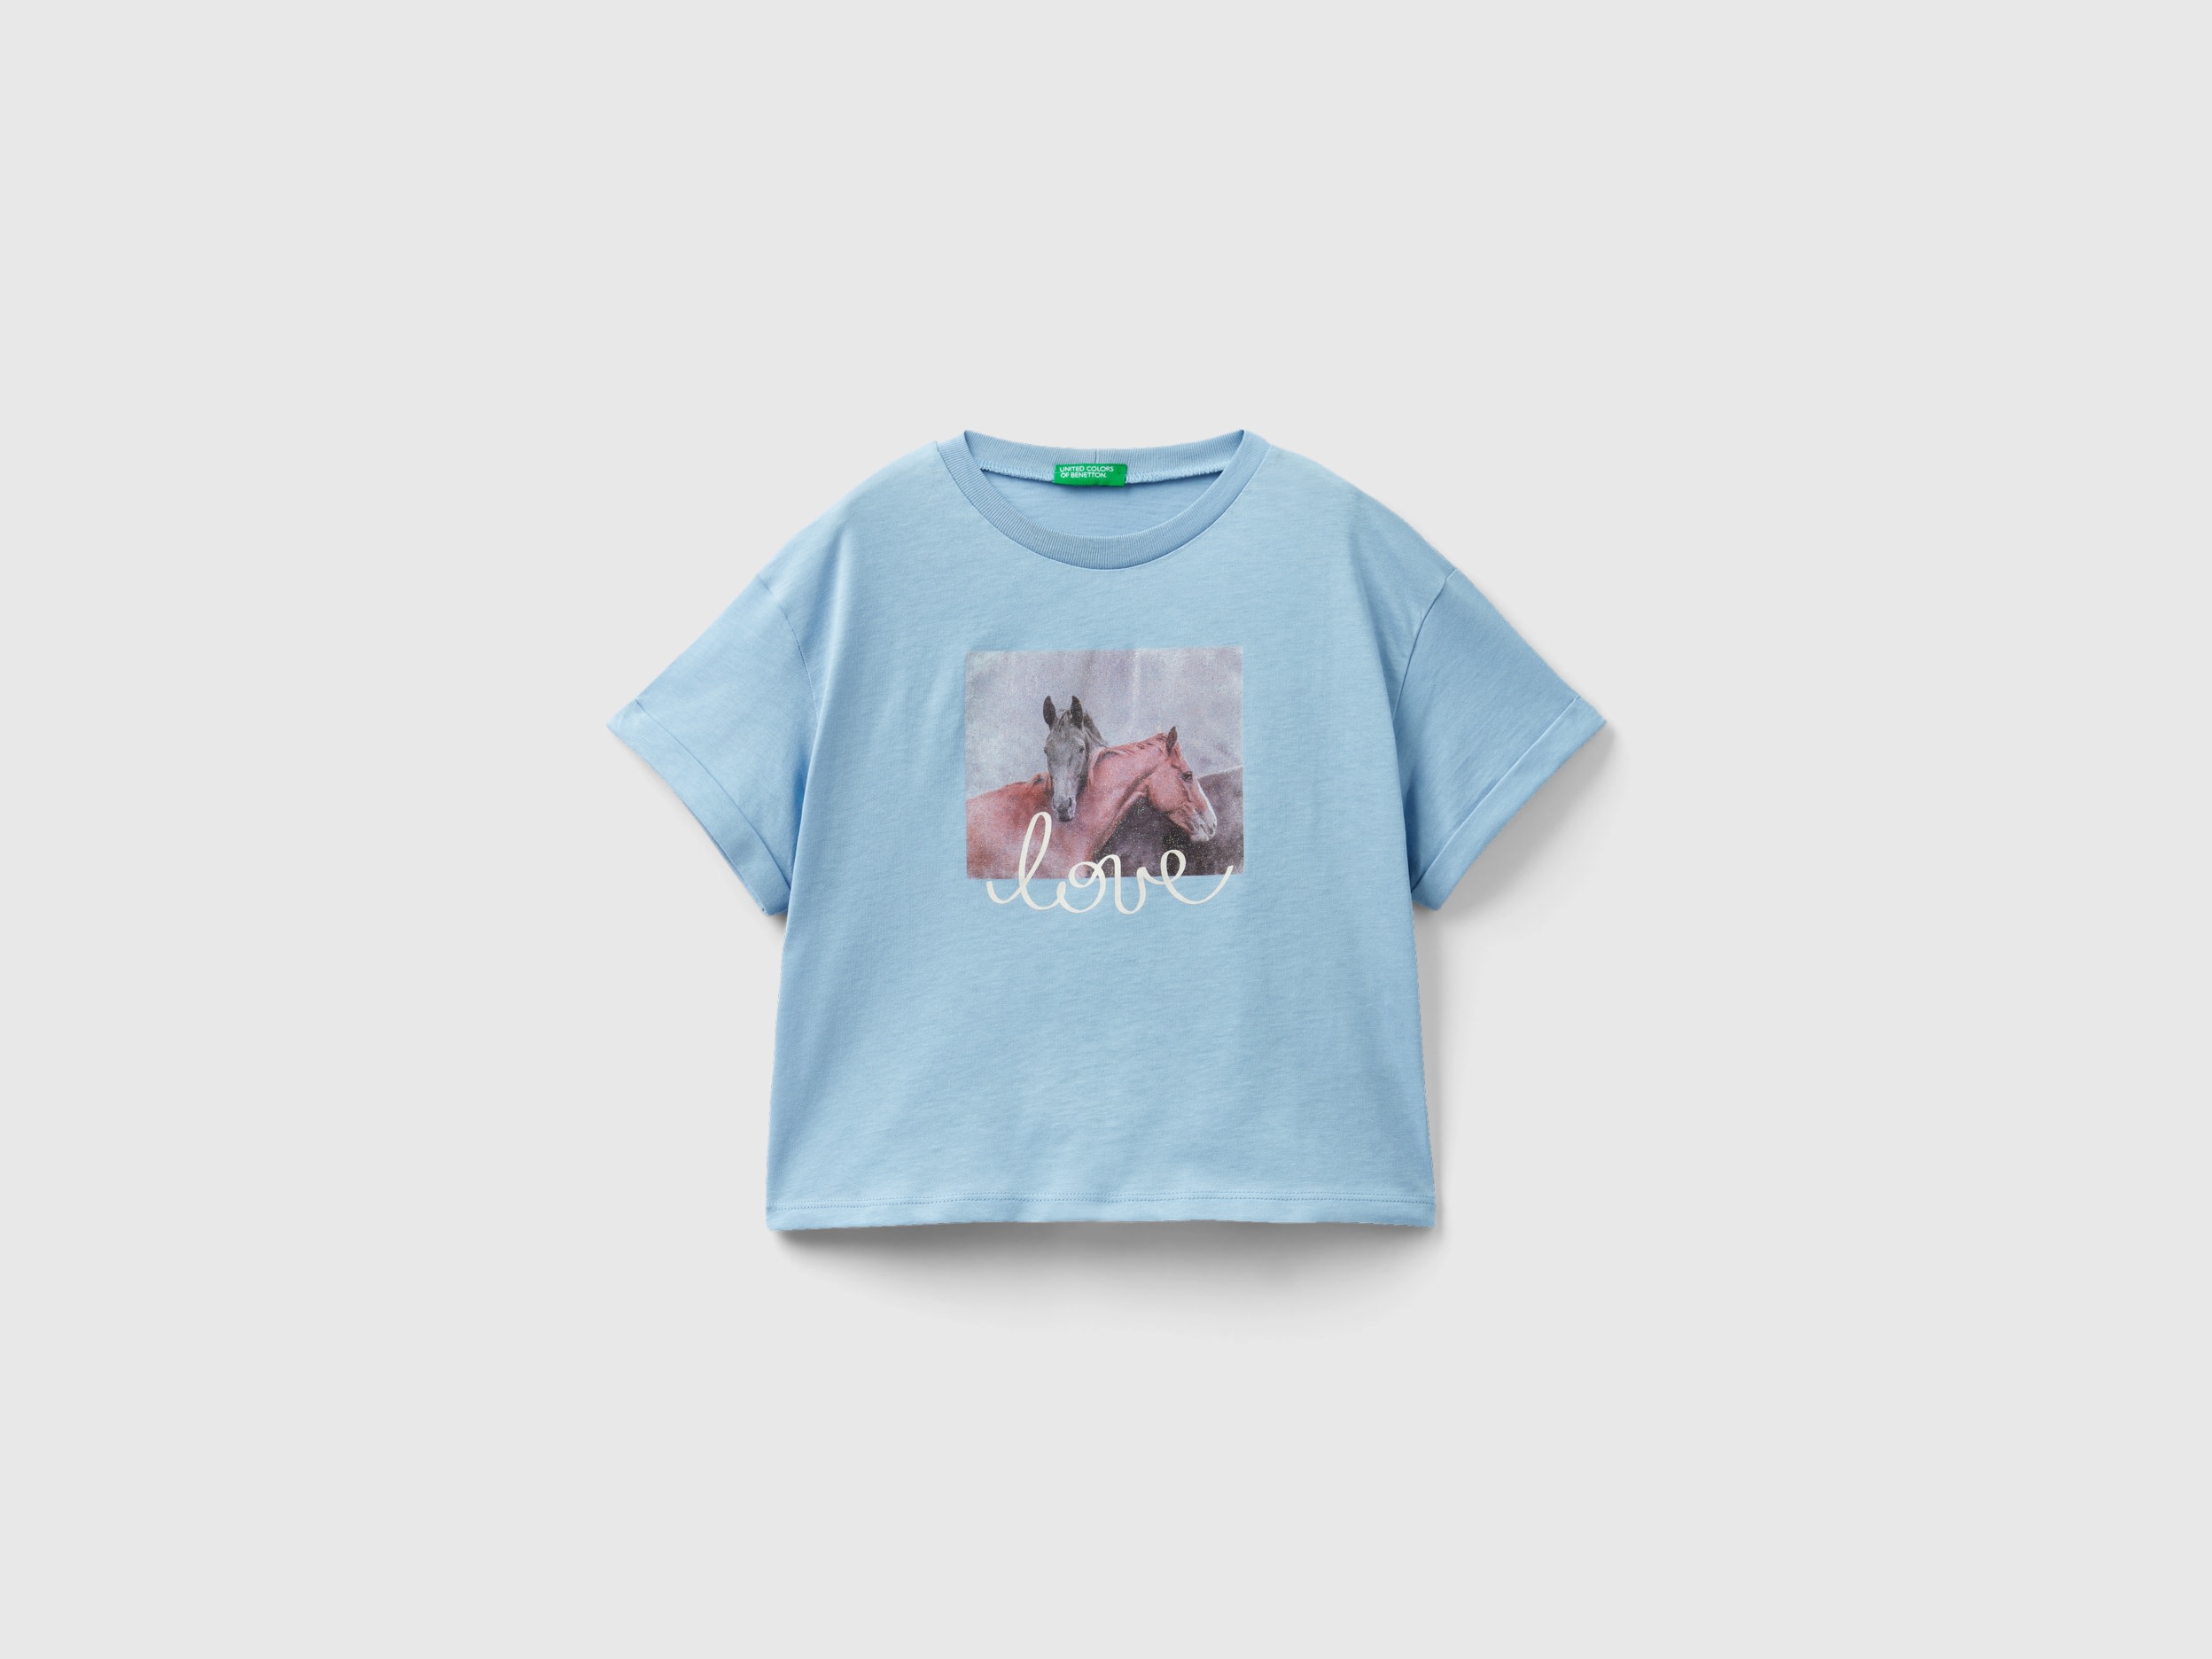 Image of Benetton, T-shirt With Photographic Horse Print, size L, Sky Blue, Kids